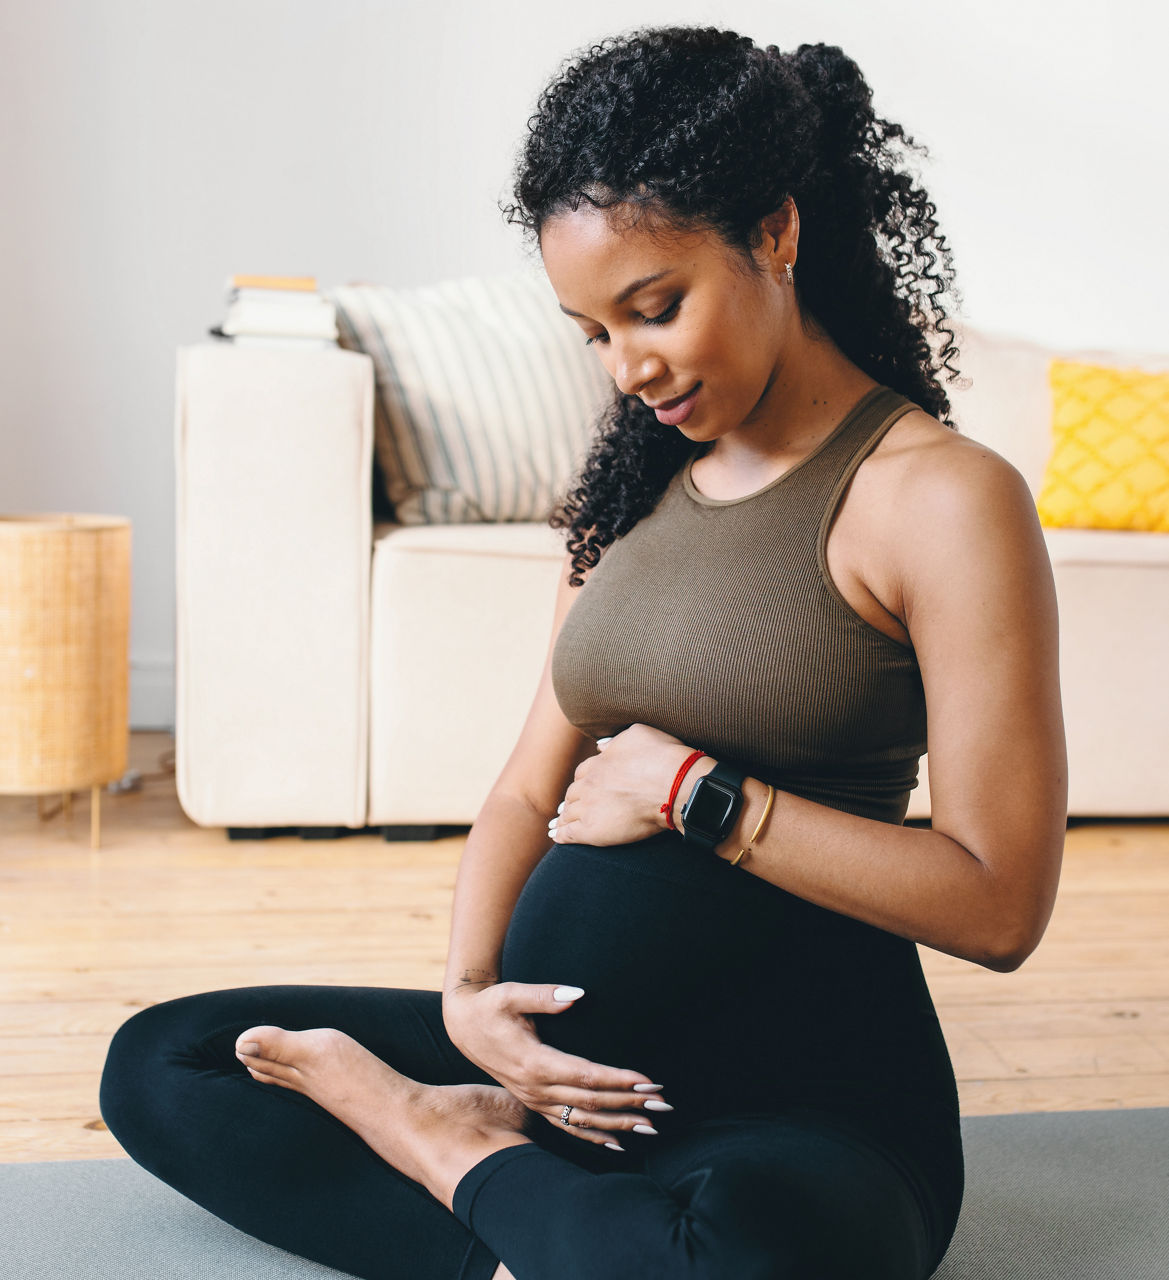 A pregnant woman relaxing at home